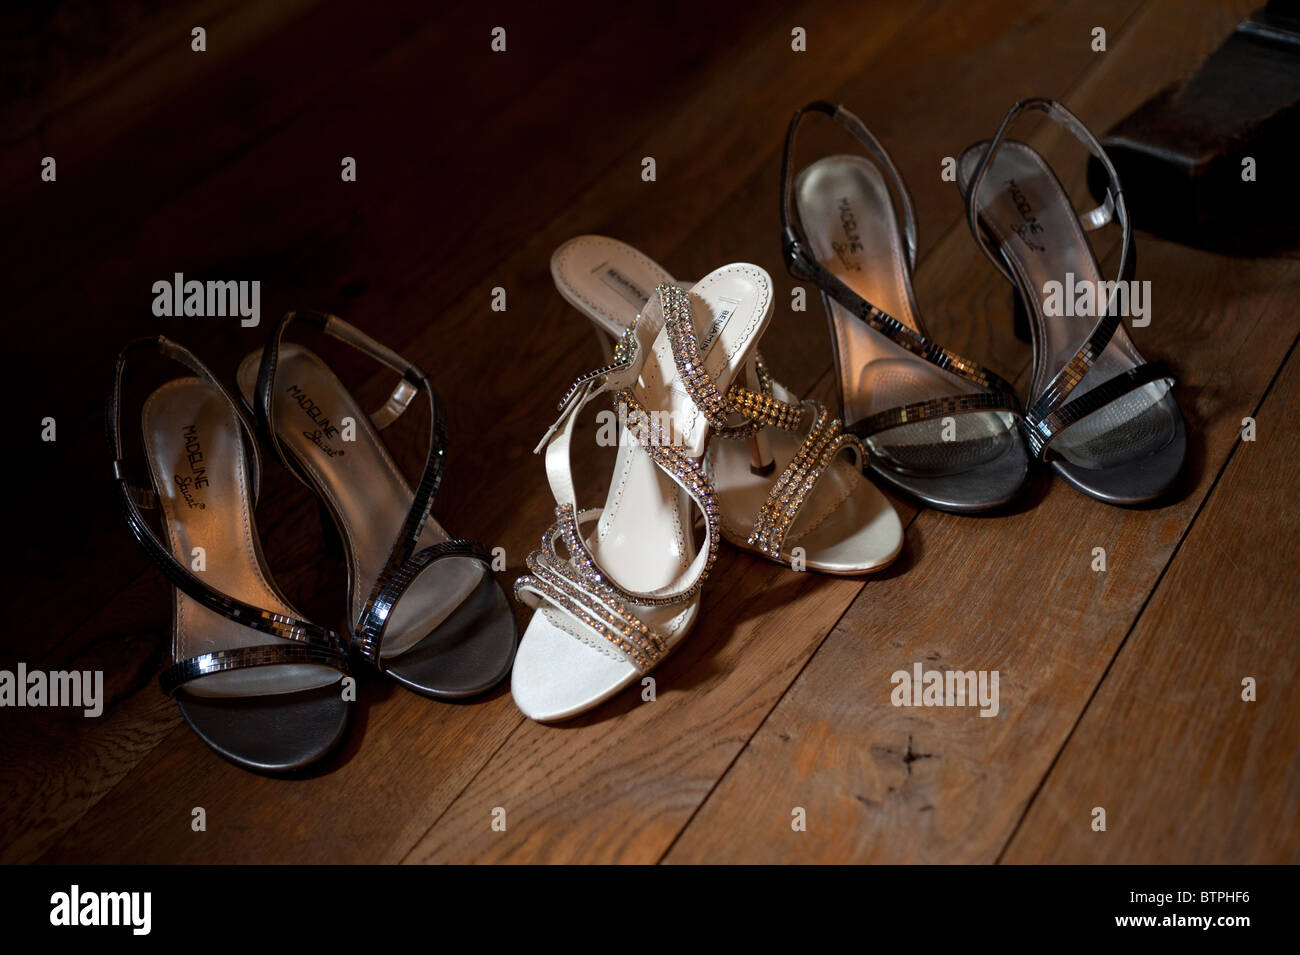 Brides & bridesmaids sandals together in a pool of light on a dark wooden  floor awaiting the bridal party Stock Photo - Alamy